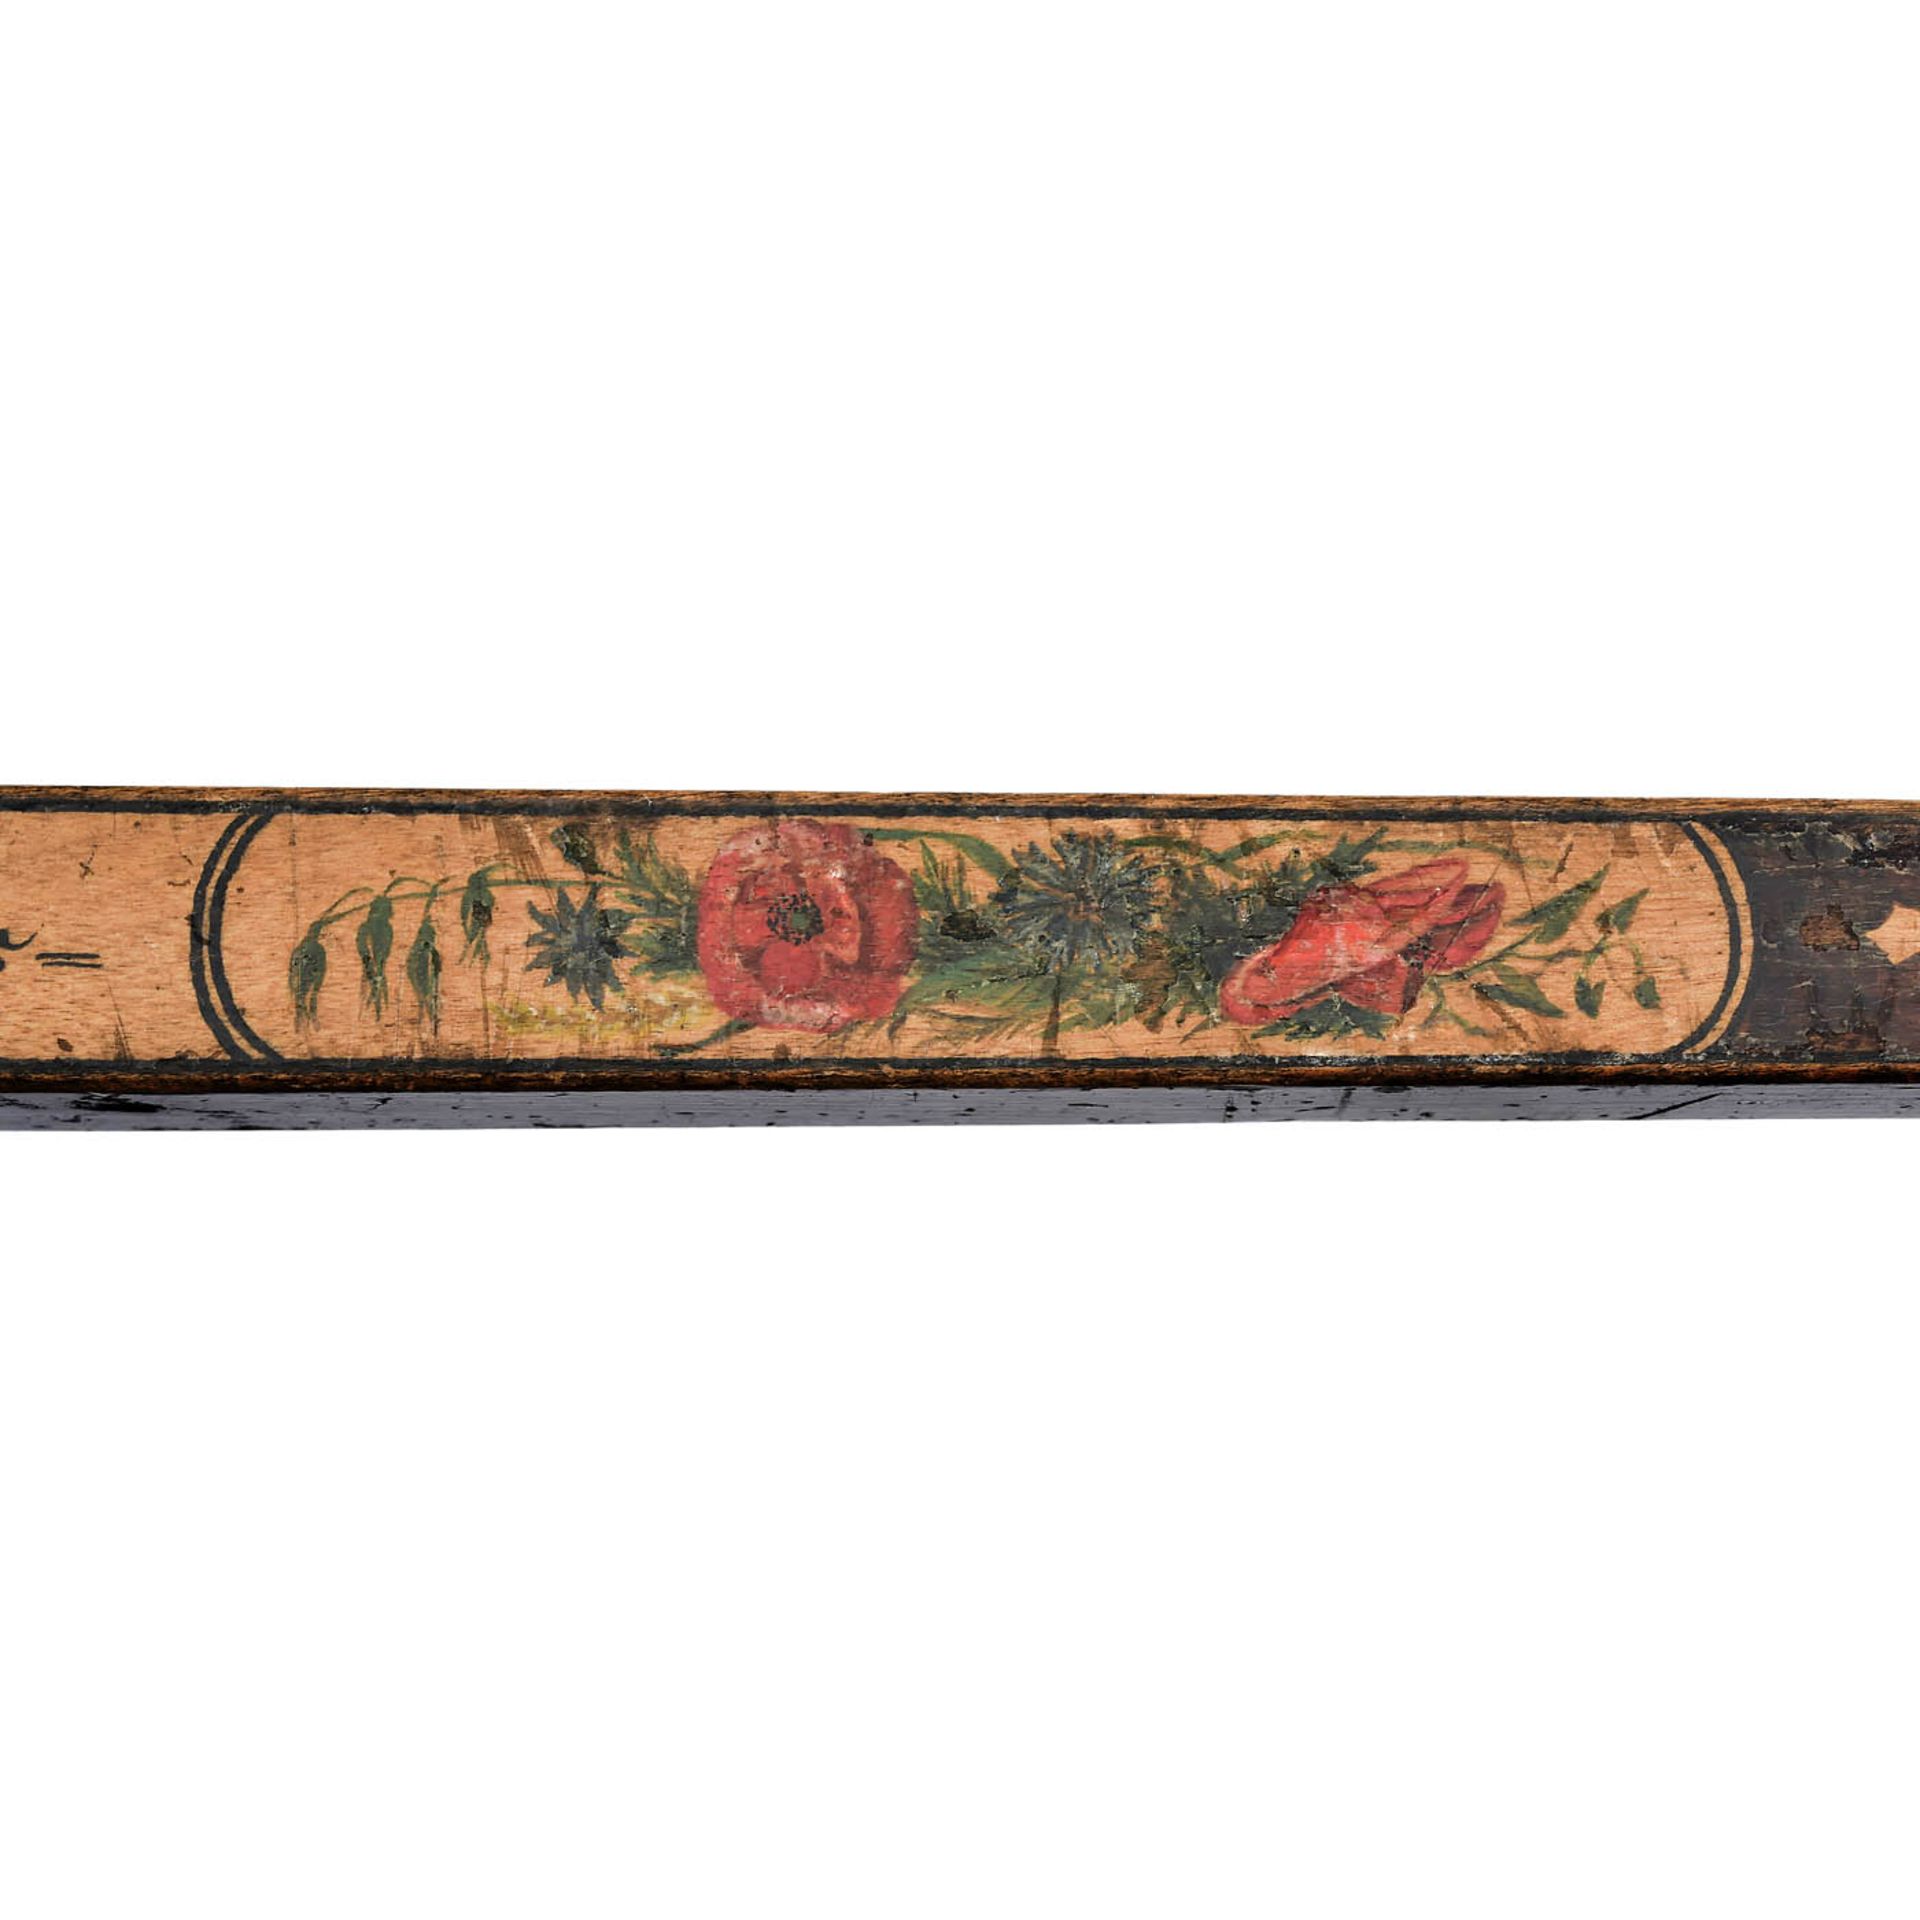 2 Ornately Crafted German Tailor's Scrolls, c. 1820-30 - Image 4 of 4